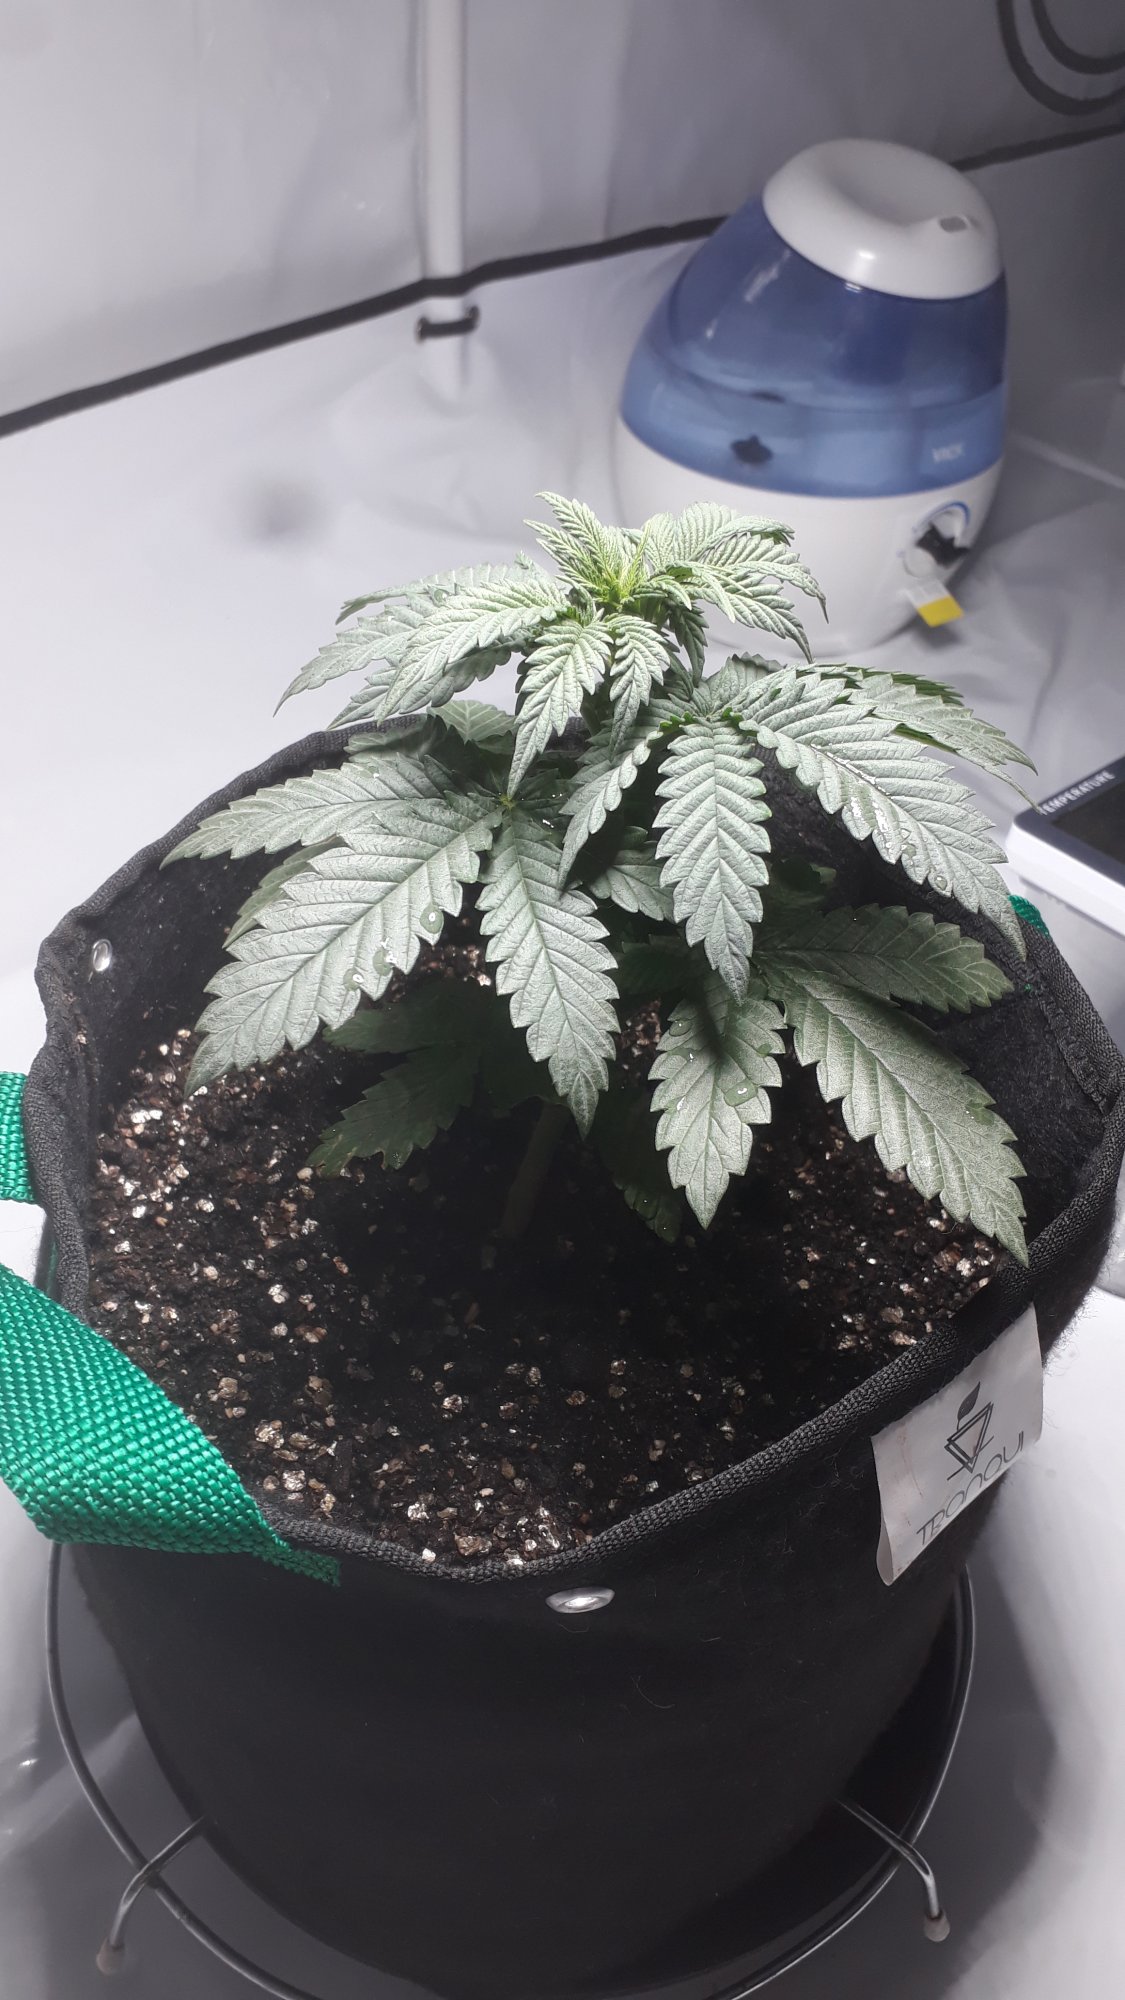 Help 1st time grower 1 month old plant small 4